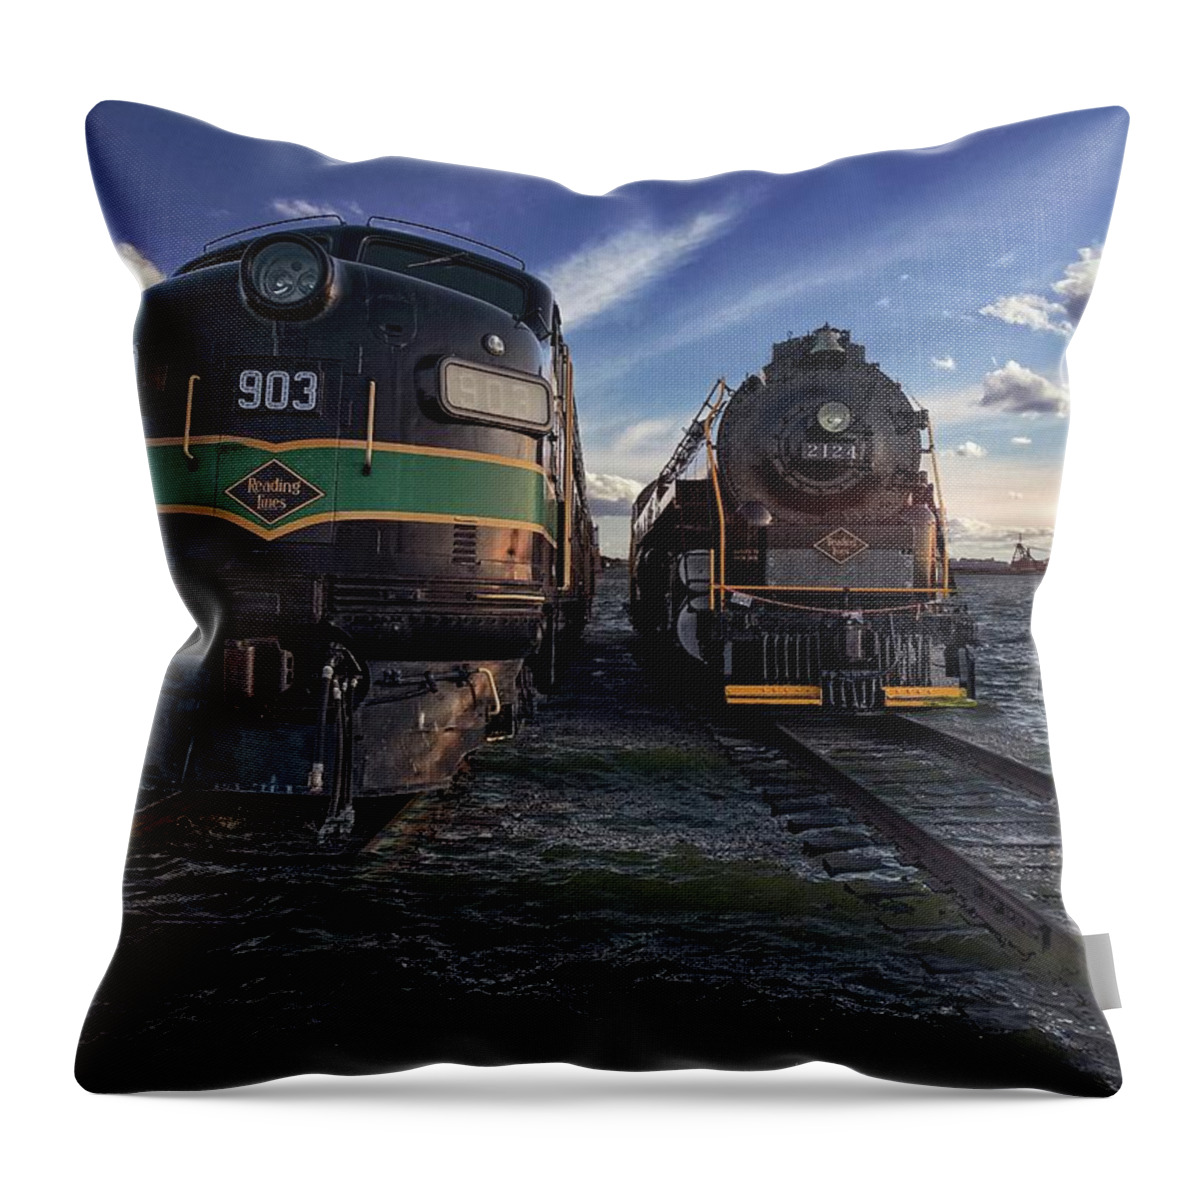 Train Throw Pillow featuring the photograph Trains, Red Hook Waterfront in Brooklyn by Carol Whaley Addassi